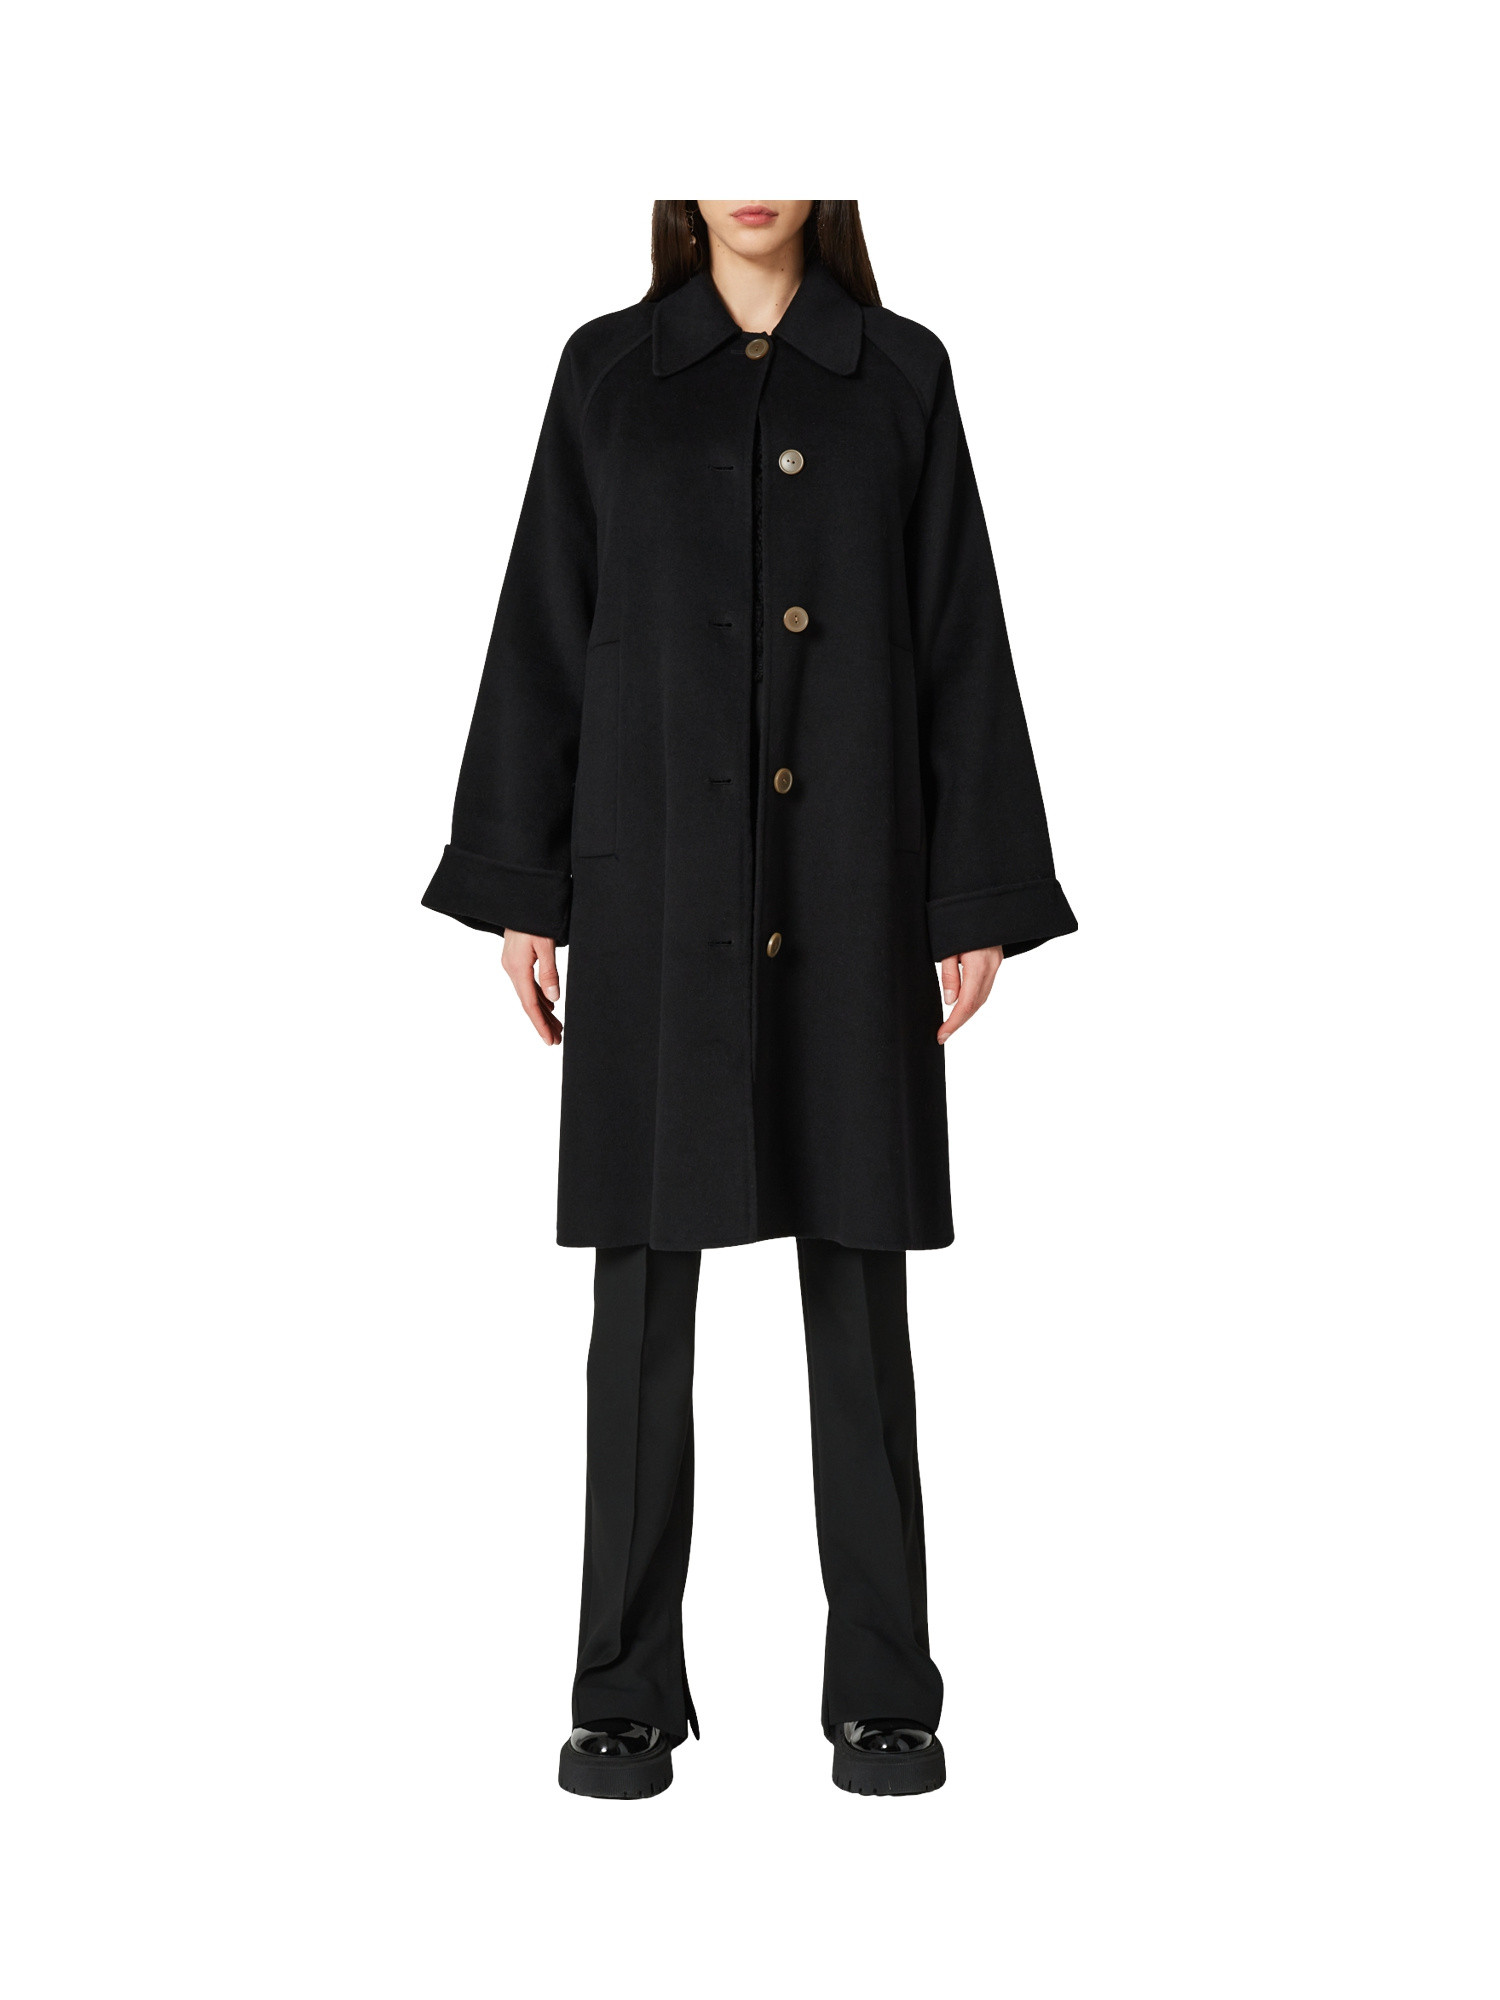 Double single-breasted coat sewn by hand, Black, large image number 5